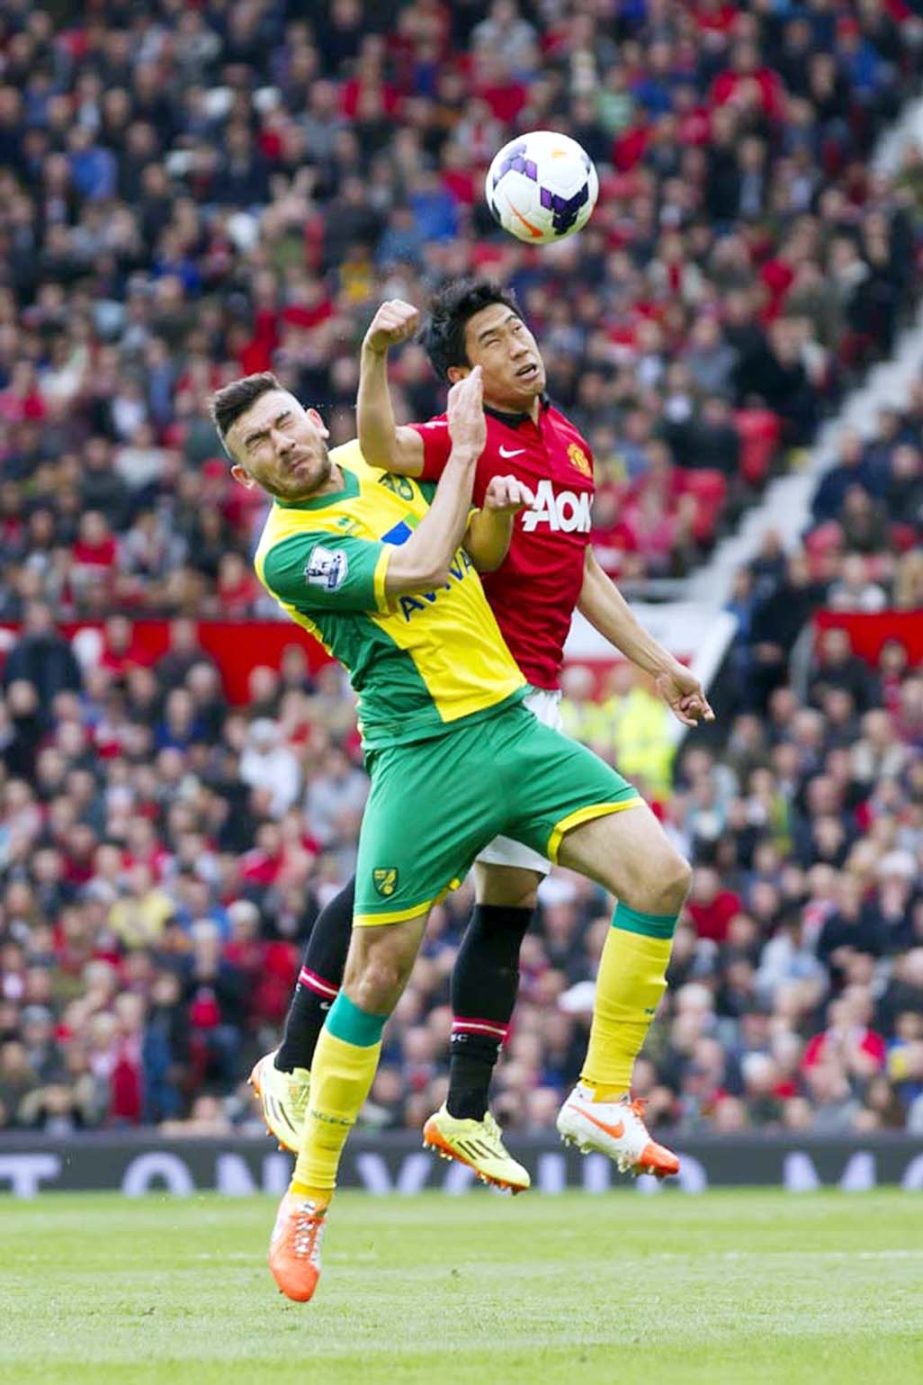 Manchester United's Shinji Kagawa (right) fights for the ball against Norwich City's Robert Snodgrass during their English Premier League soccer match at Old Trafford Stadium, Manchester, England on Saturday.